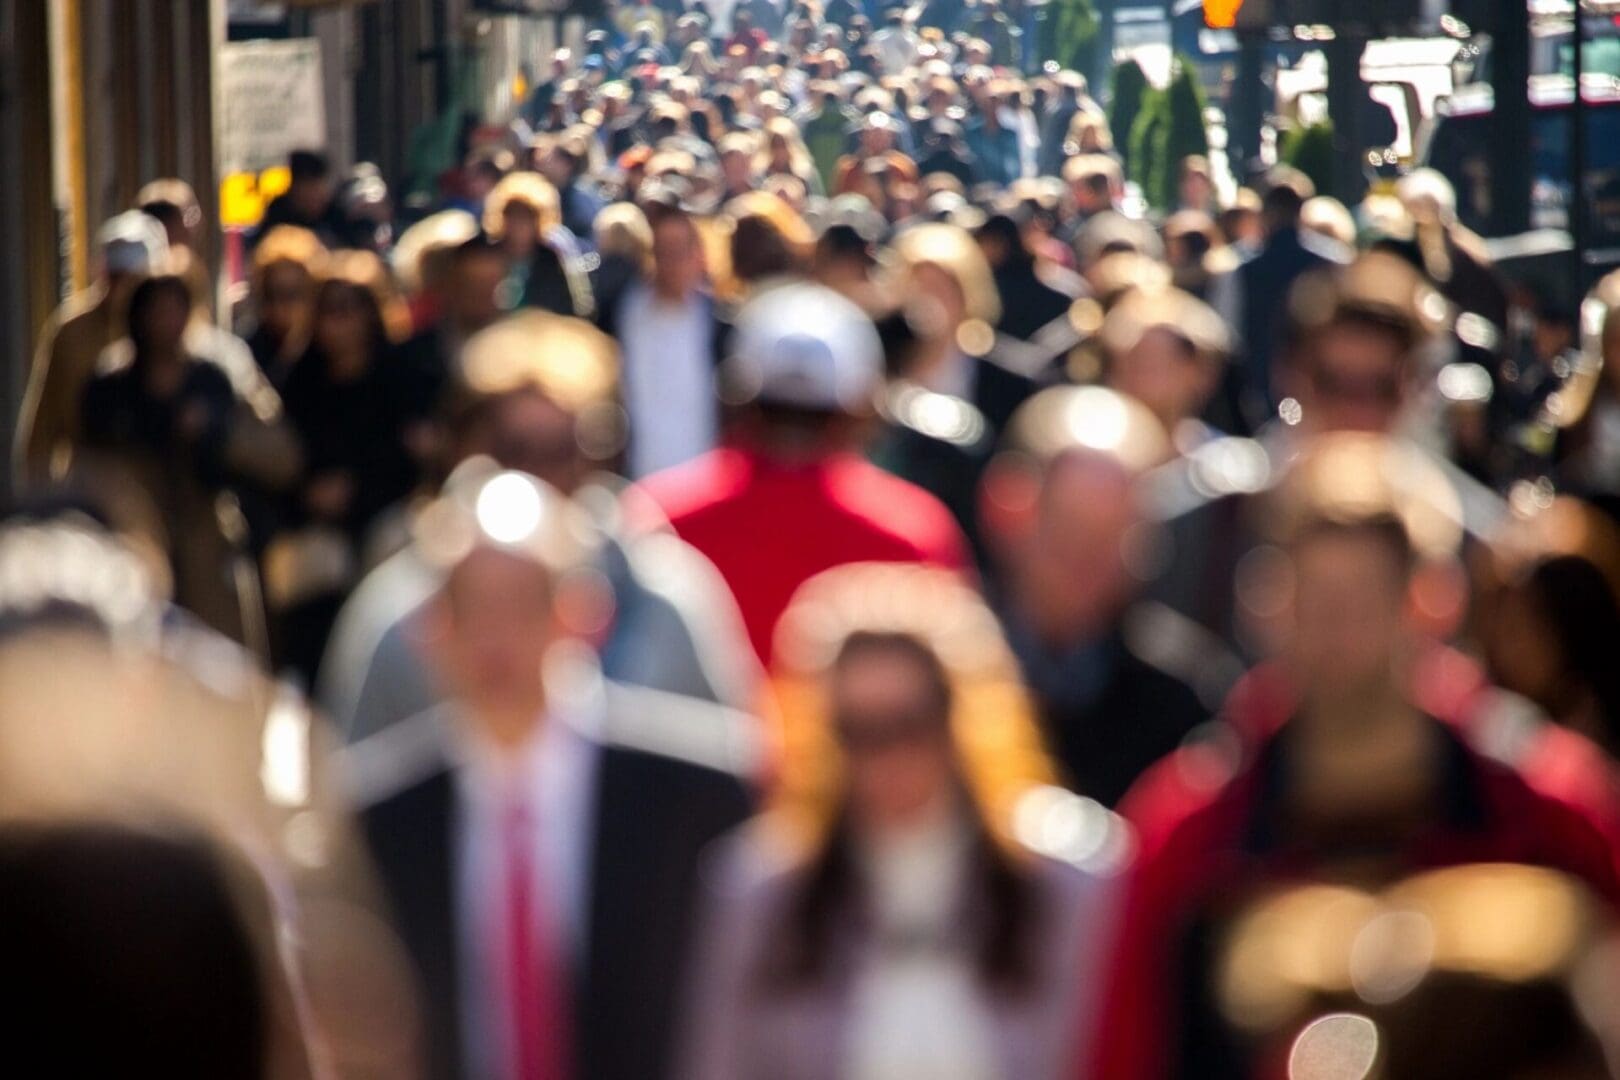 A blurry image of a crowd of people walking down a street.